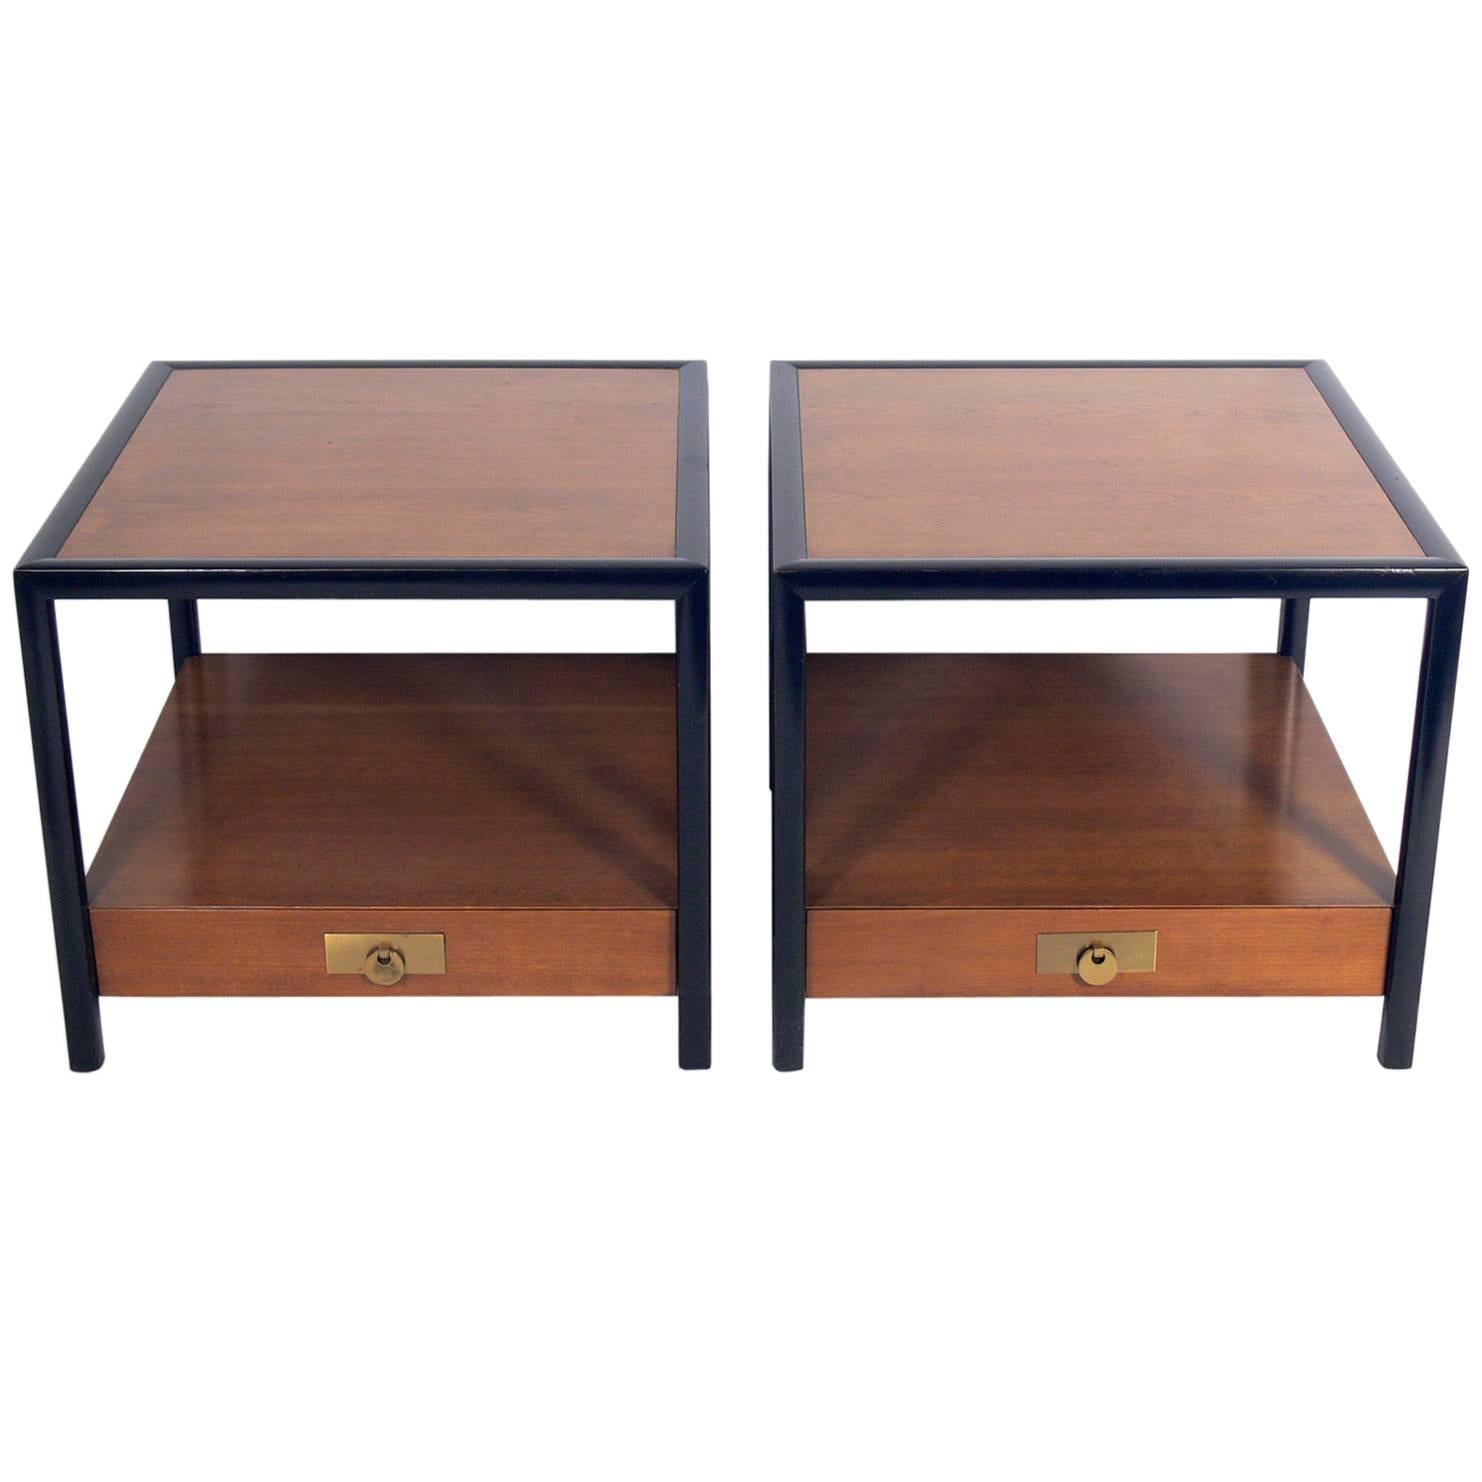 Pair of Clean-Lined Night Stands or End Tables by Michael Taylor for Baker